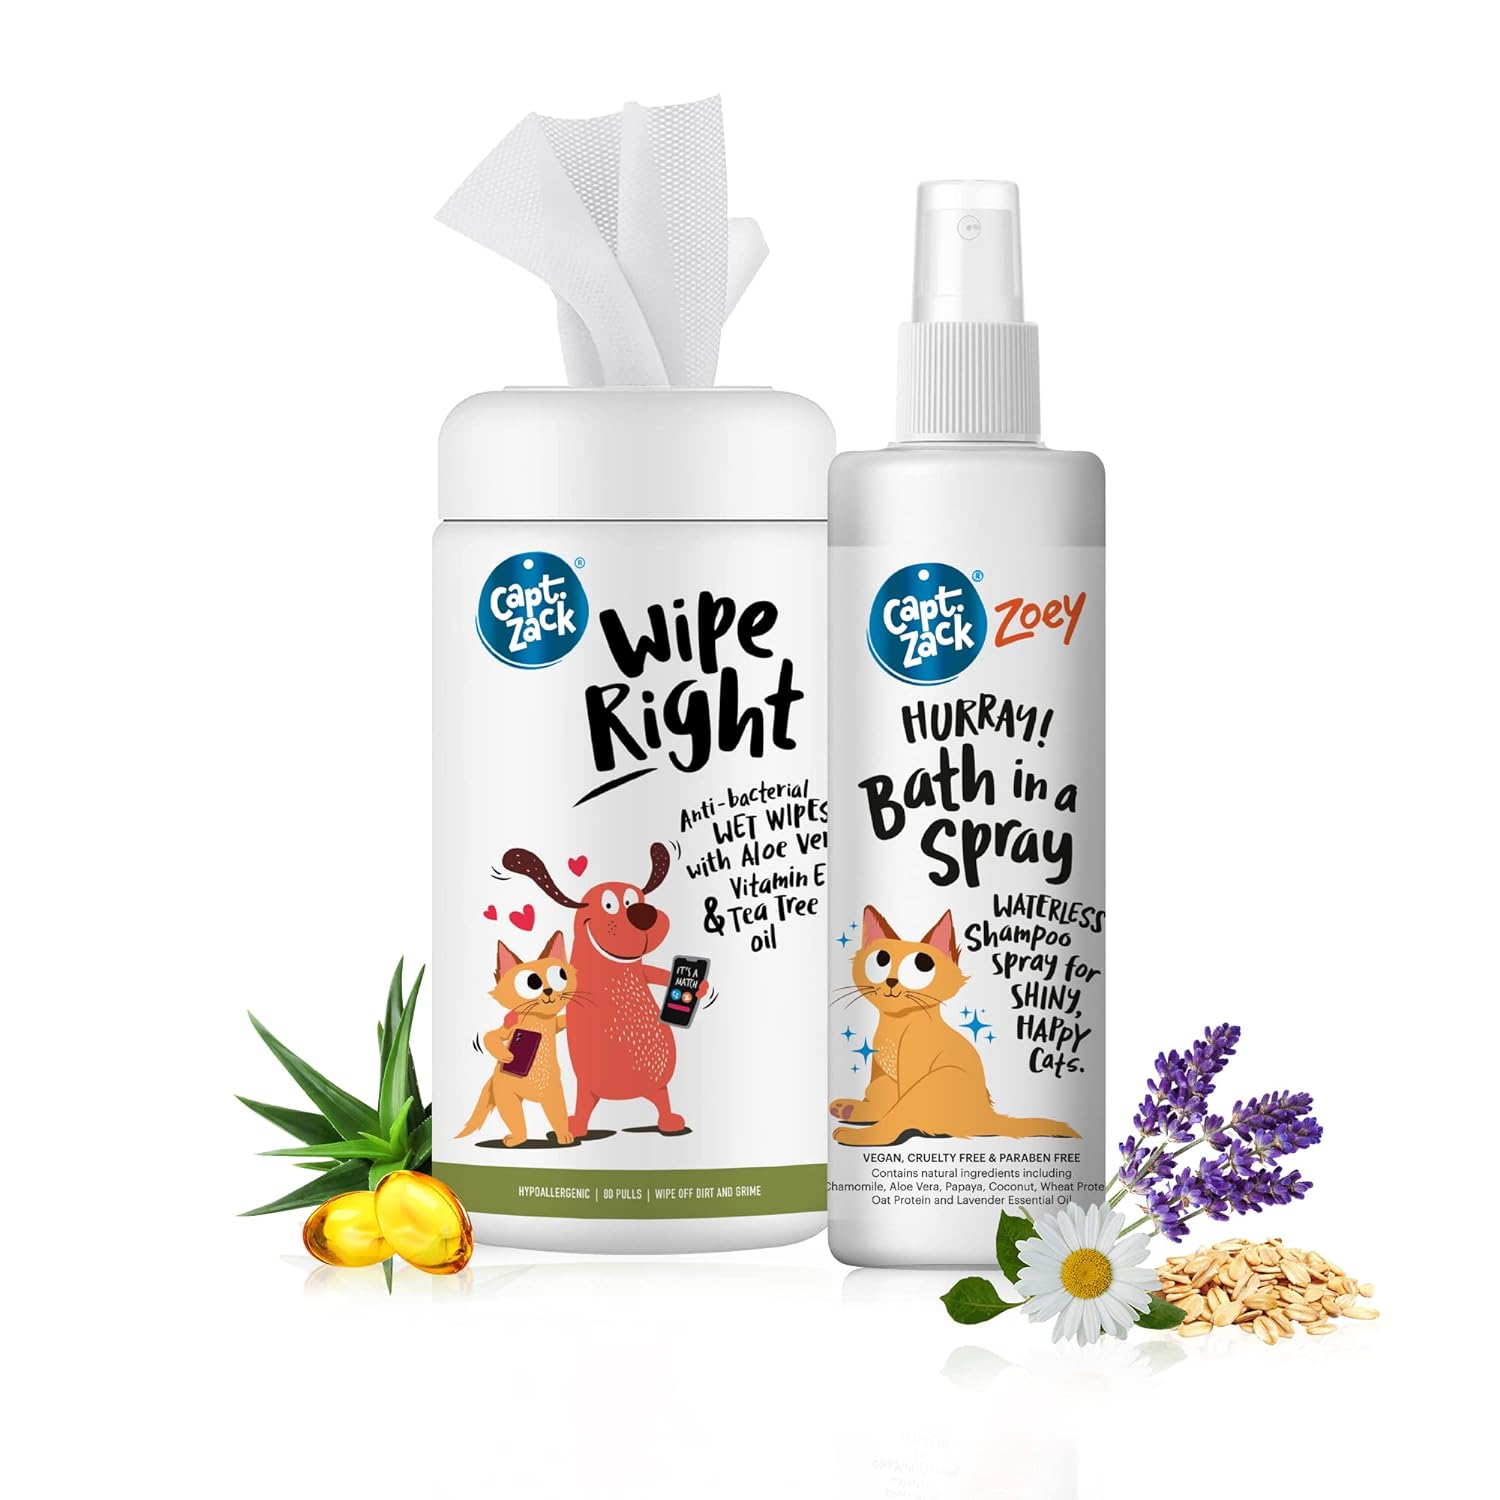 Wipe Right Anti-Bacterial Wet Wipes for Dogs & Cats, 80 Wipes & Tea Tree Oil + Zoey Hurray Bath Cat Shampoo, 250 ml